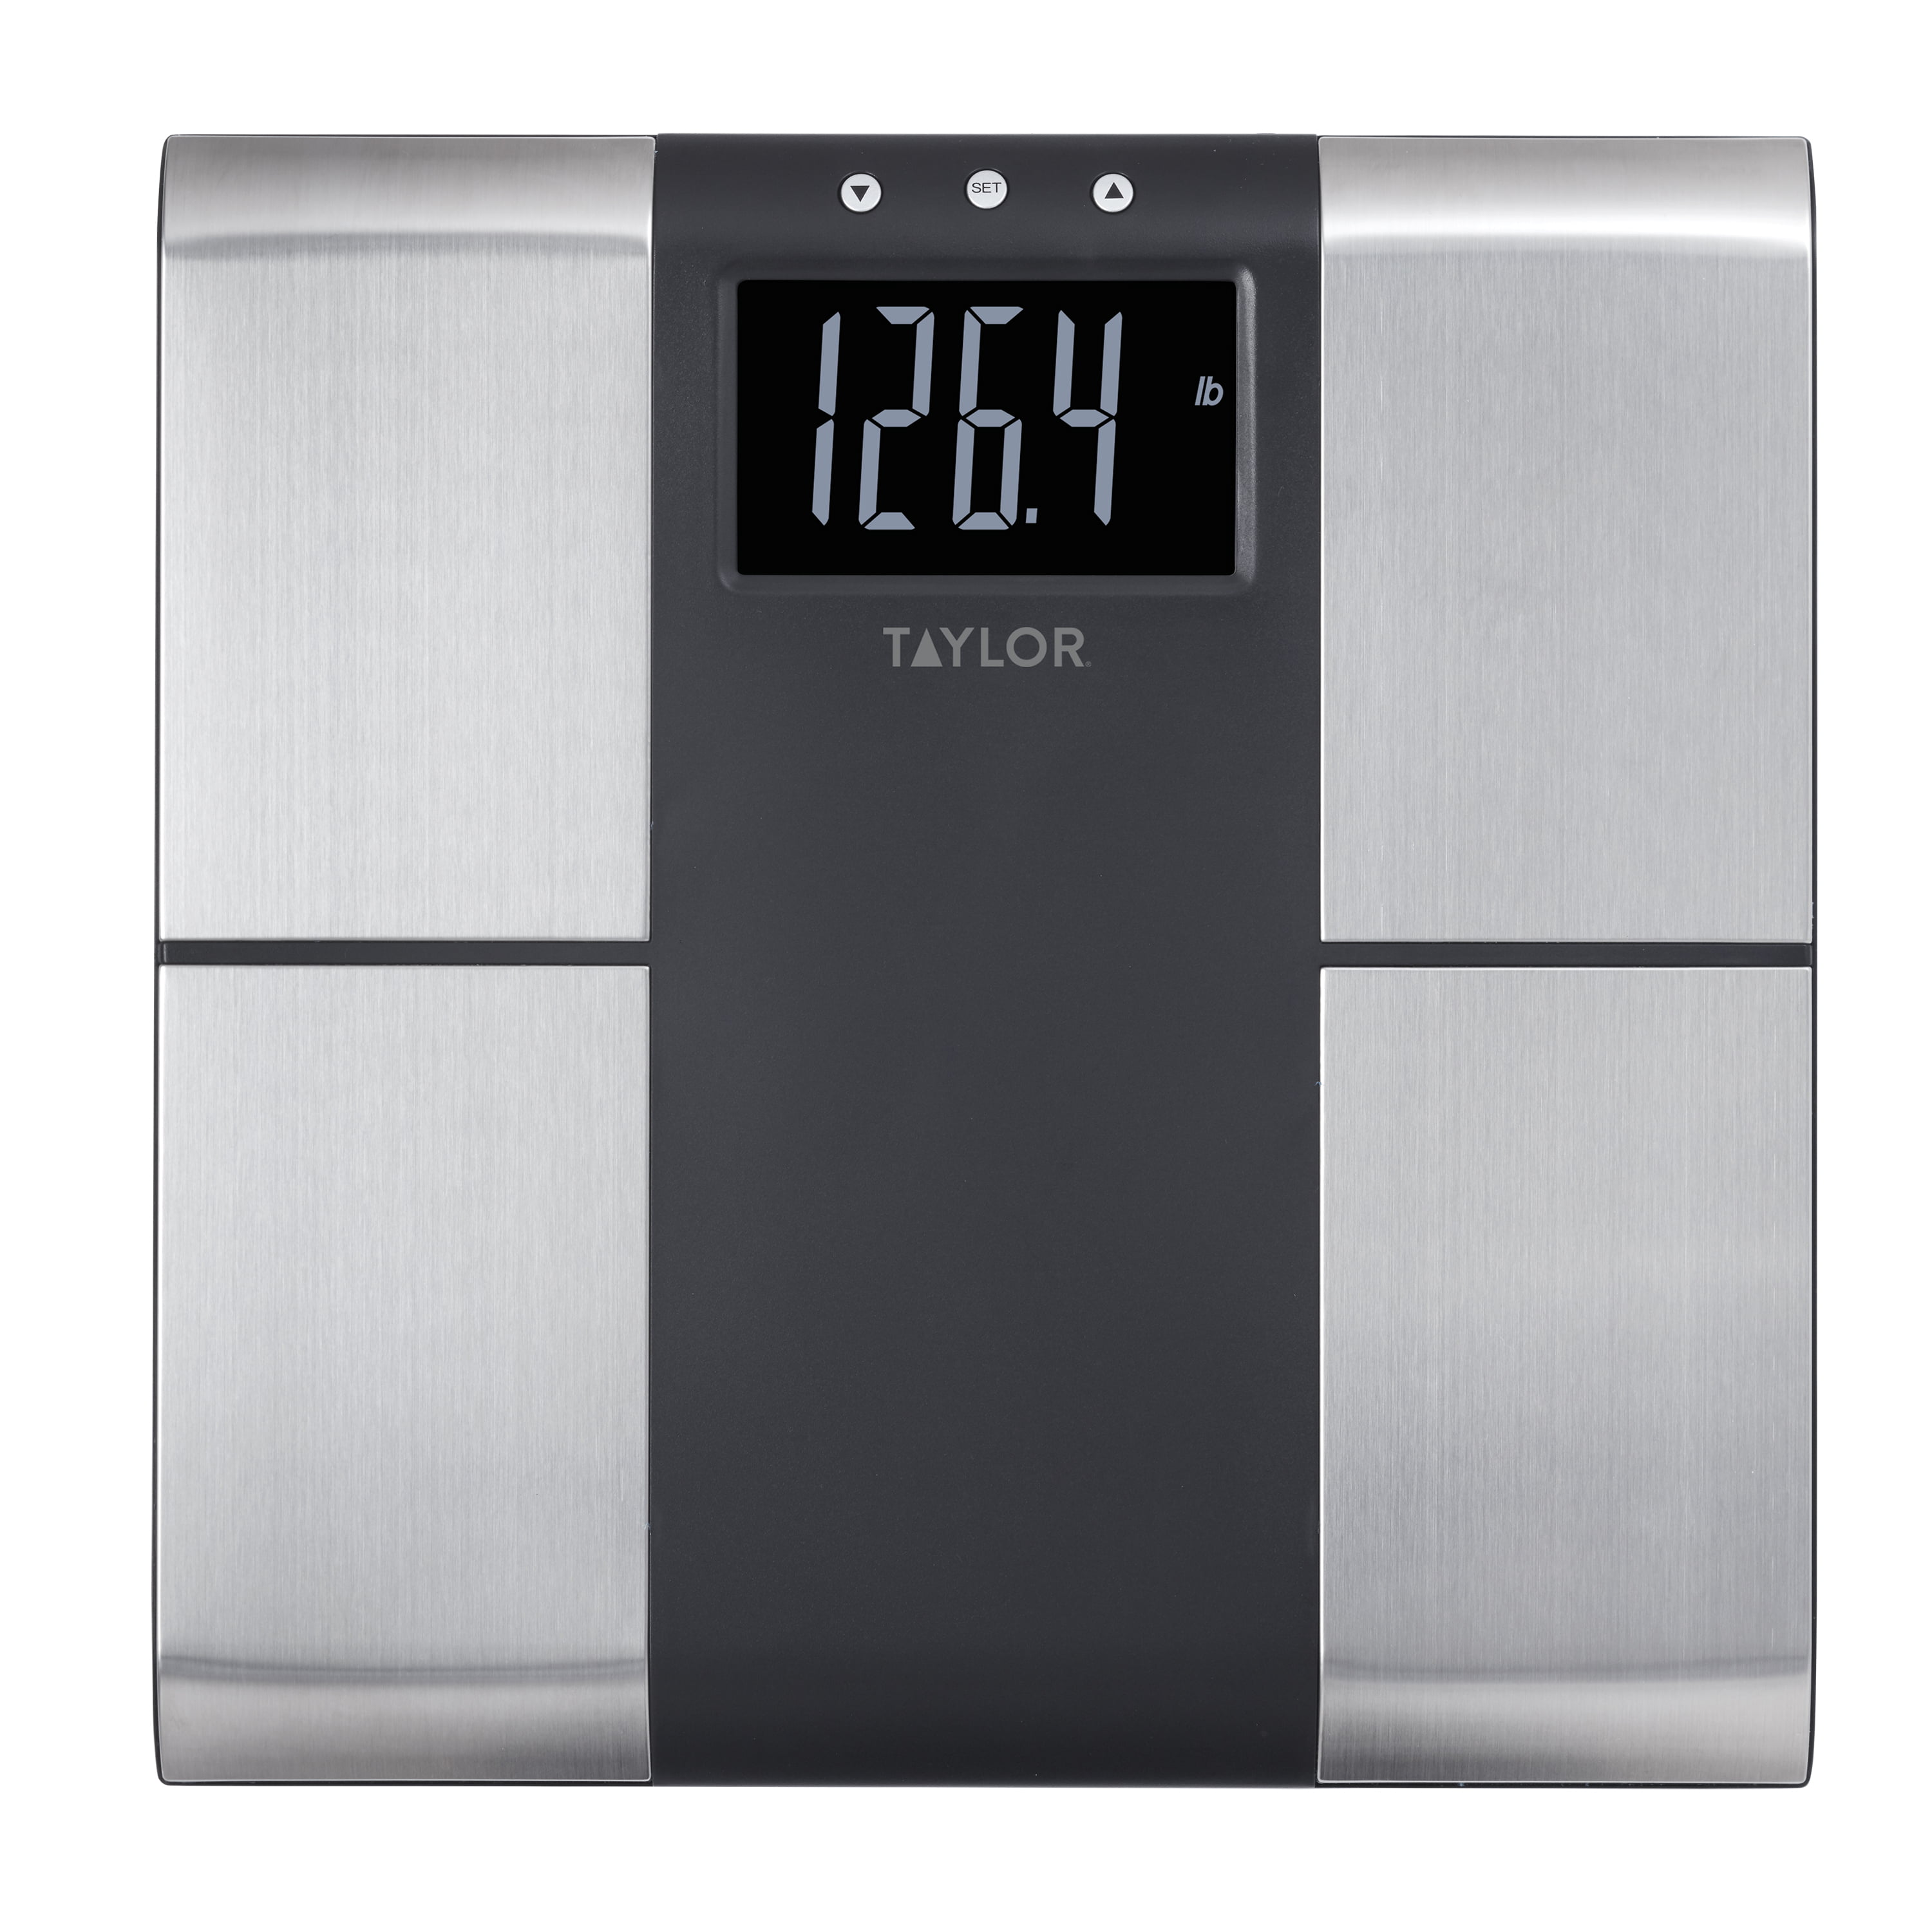 weight scale up to 500 pounds